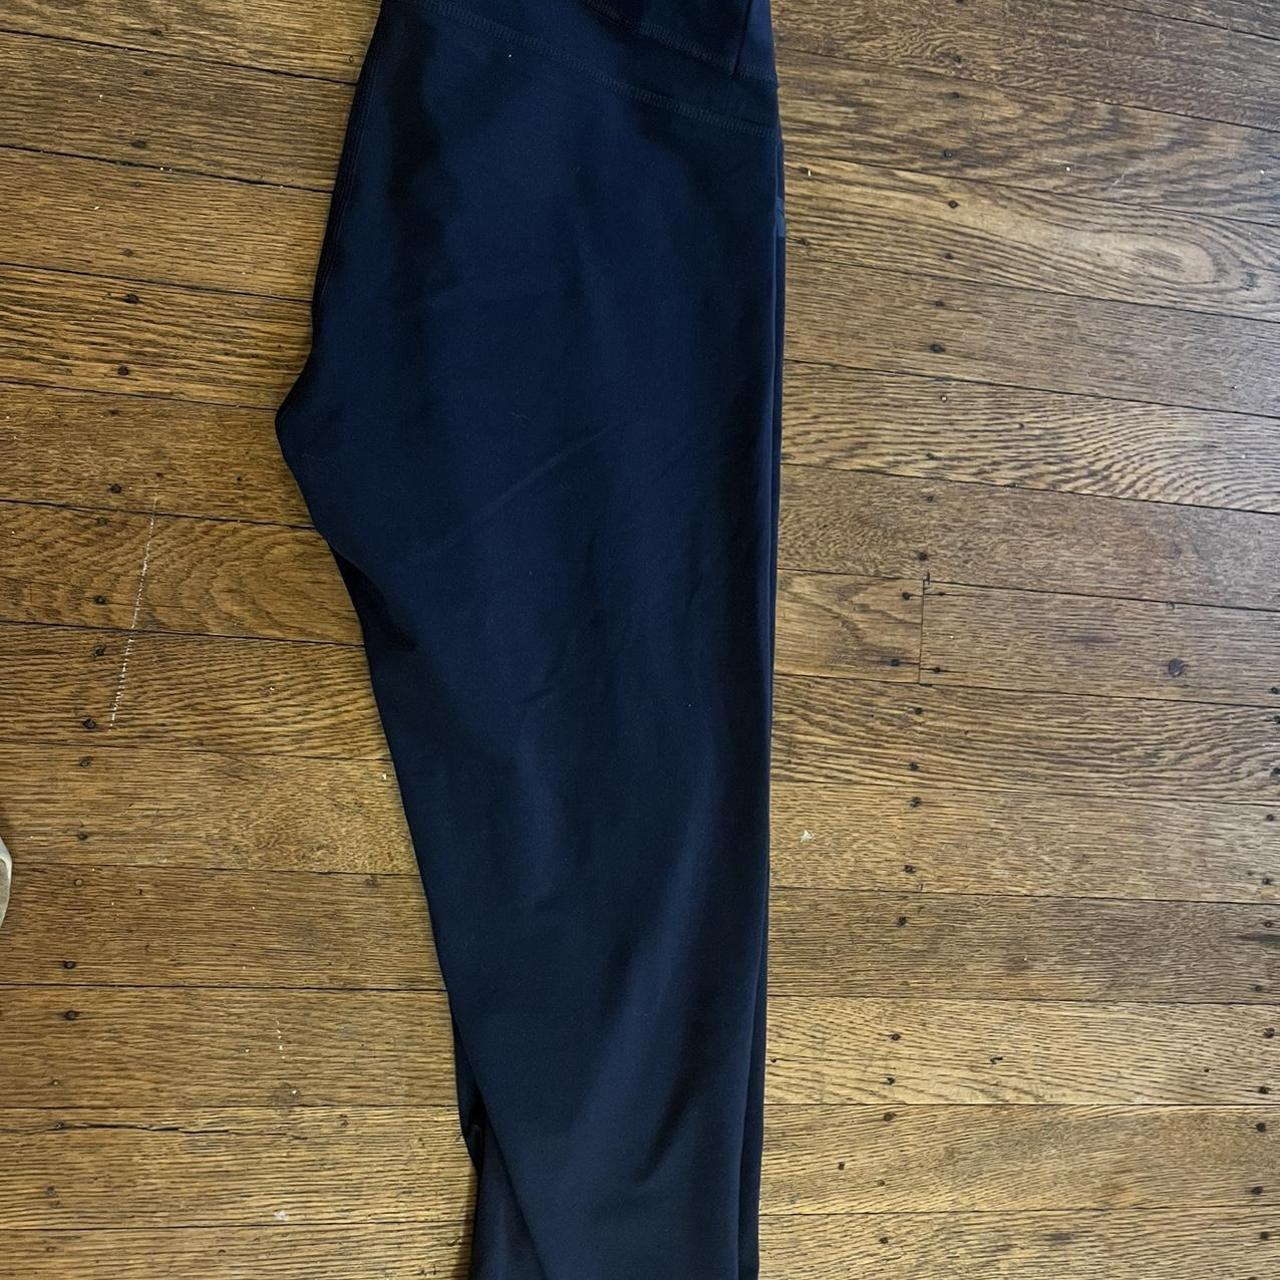 North Face Leggings Size Small Cropped leggings - Depop